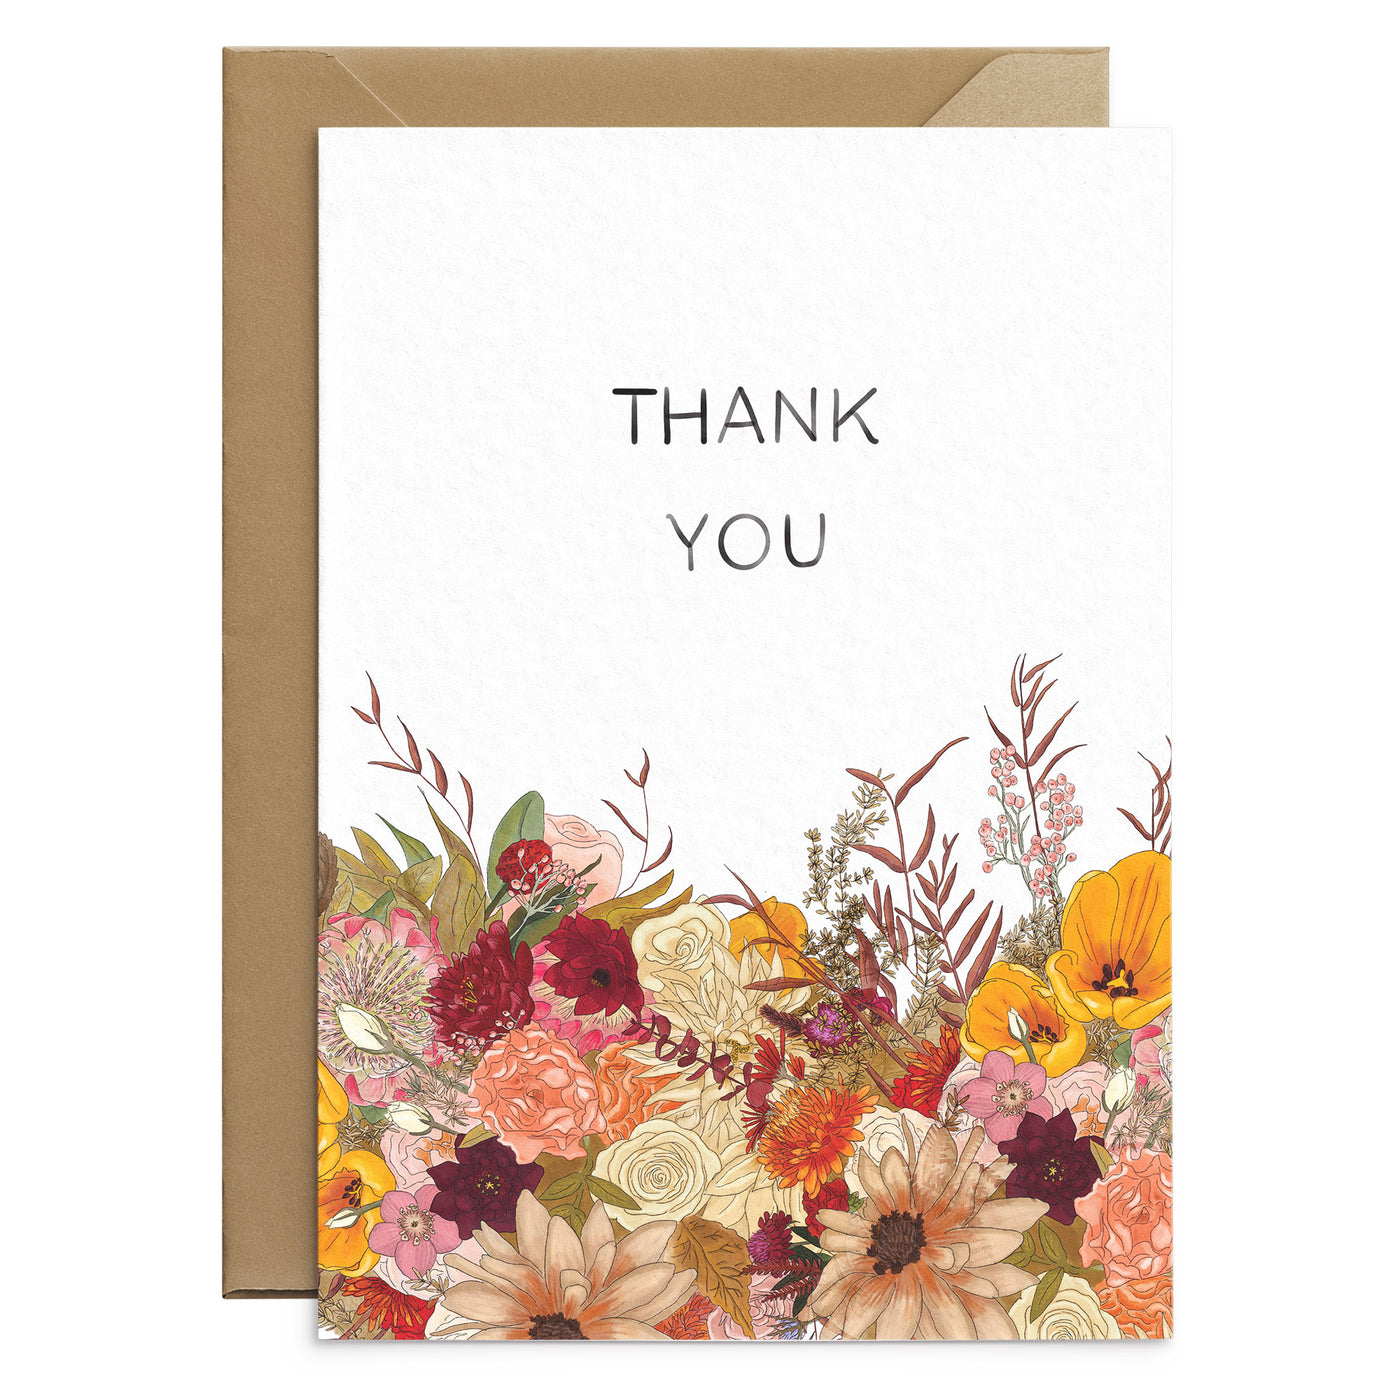 Boho-Autumn-Floral-Thank-You-Card-Set-Of-6-Greetings-Cards-Poppins-and-co